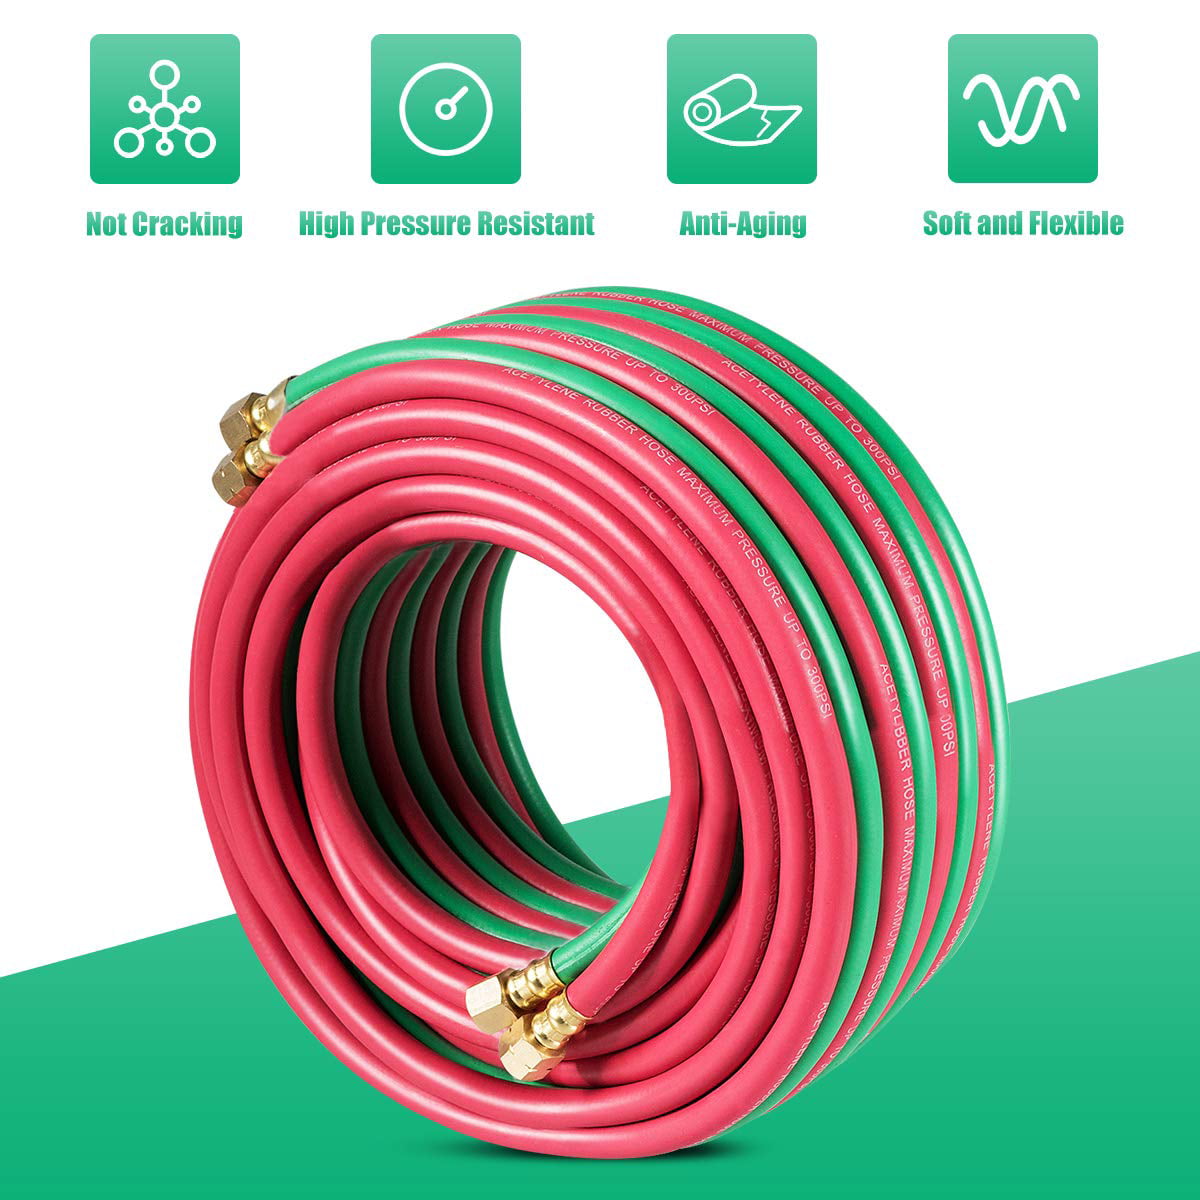 Industrial Heavy Duty Commercial Grade Quality & Home Improvement for Garage Jobsites BB BRLUCKY Home HomeLiving 25ft Red & Green Twin Welding Torch Hose Oxy Acetylene Oxygen Cutting 